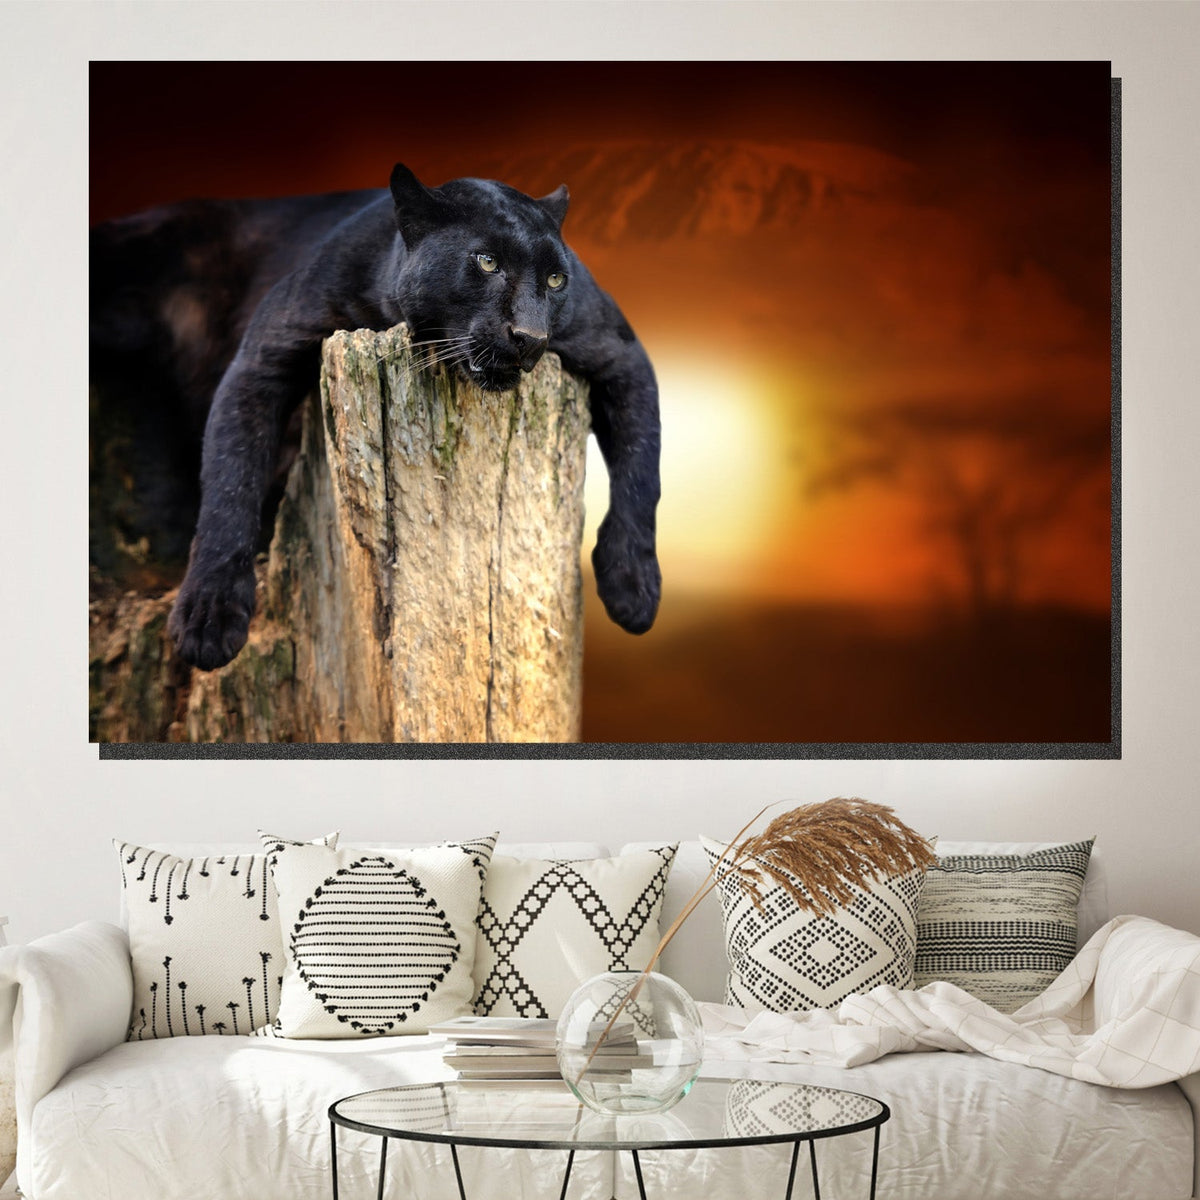 https://cdn.shopify.com/s/files/1/0387/9986/8044/products/LazyPantherCanvasArtprintStretched-4.jpg